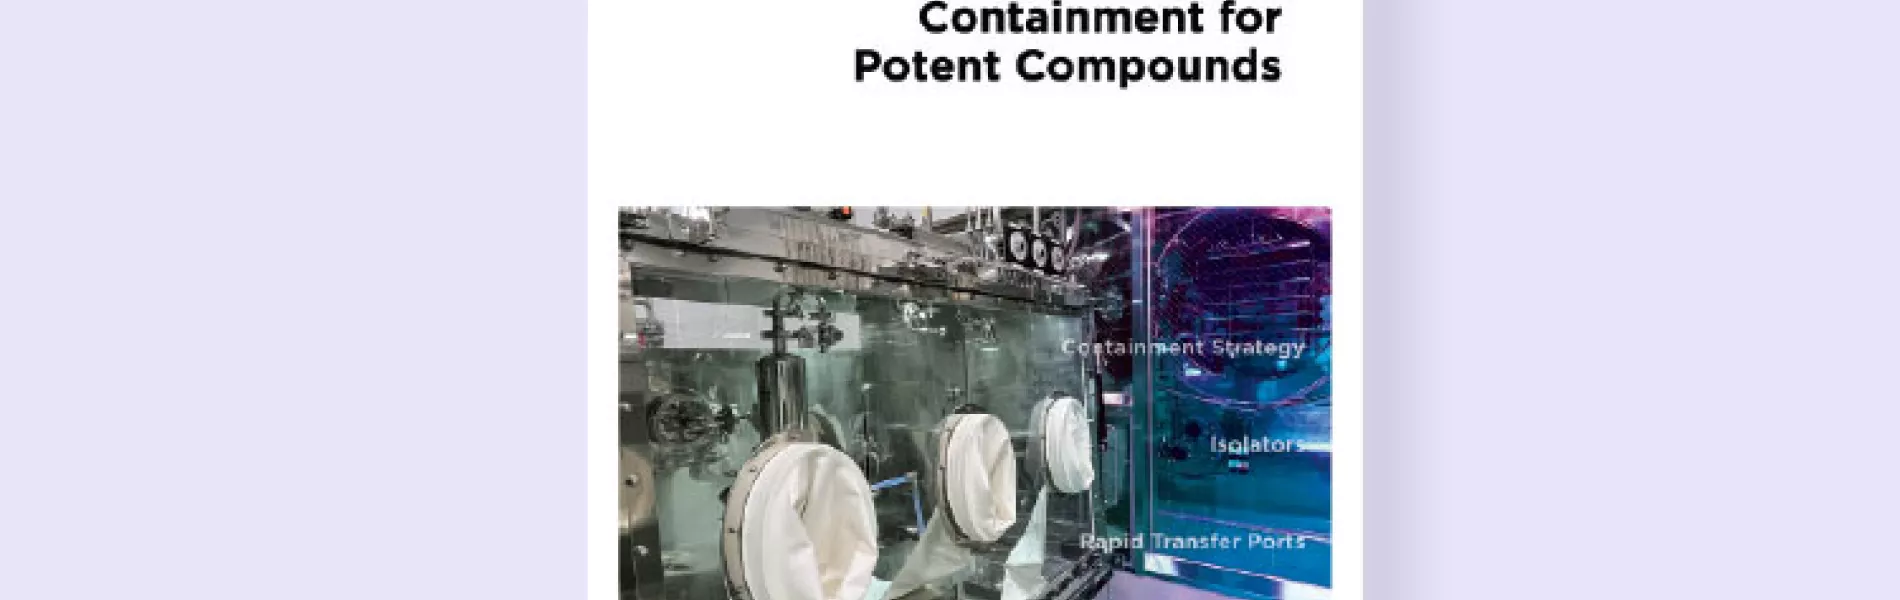 ISPE Briefs: New Guide Explores Best Practices in Pharmaceutical Containment